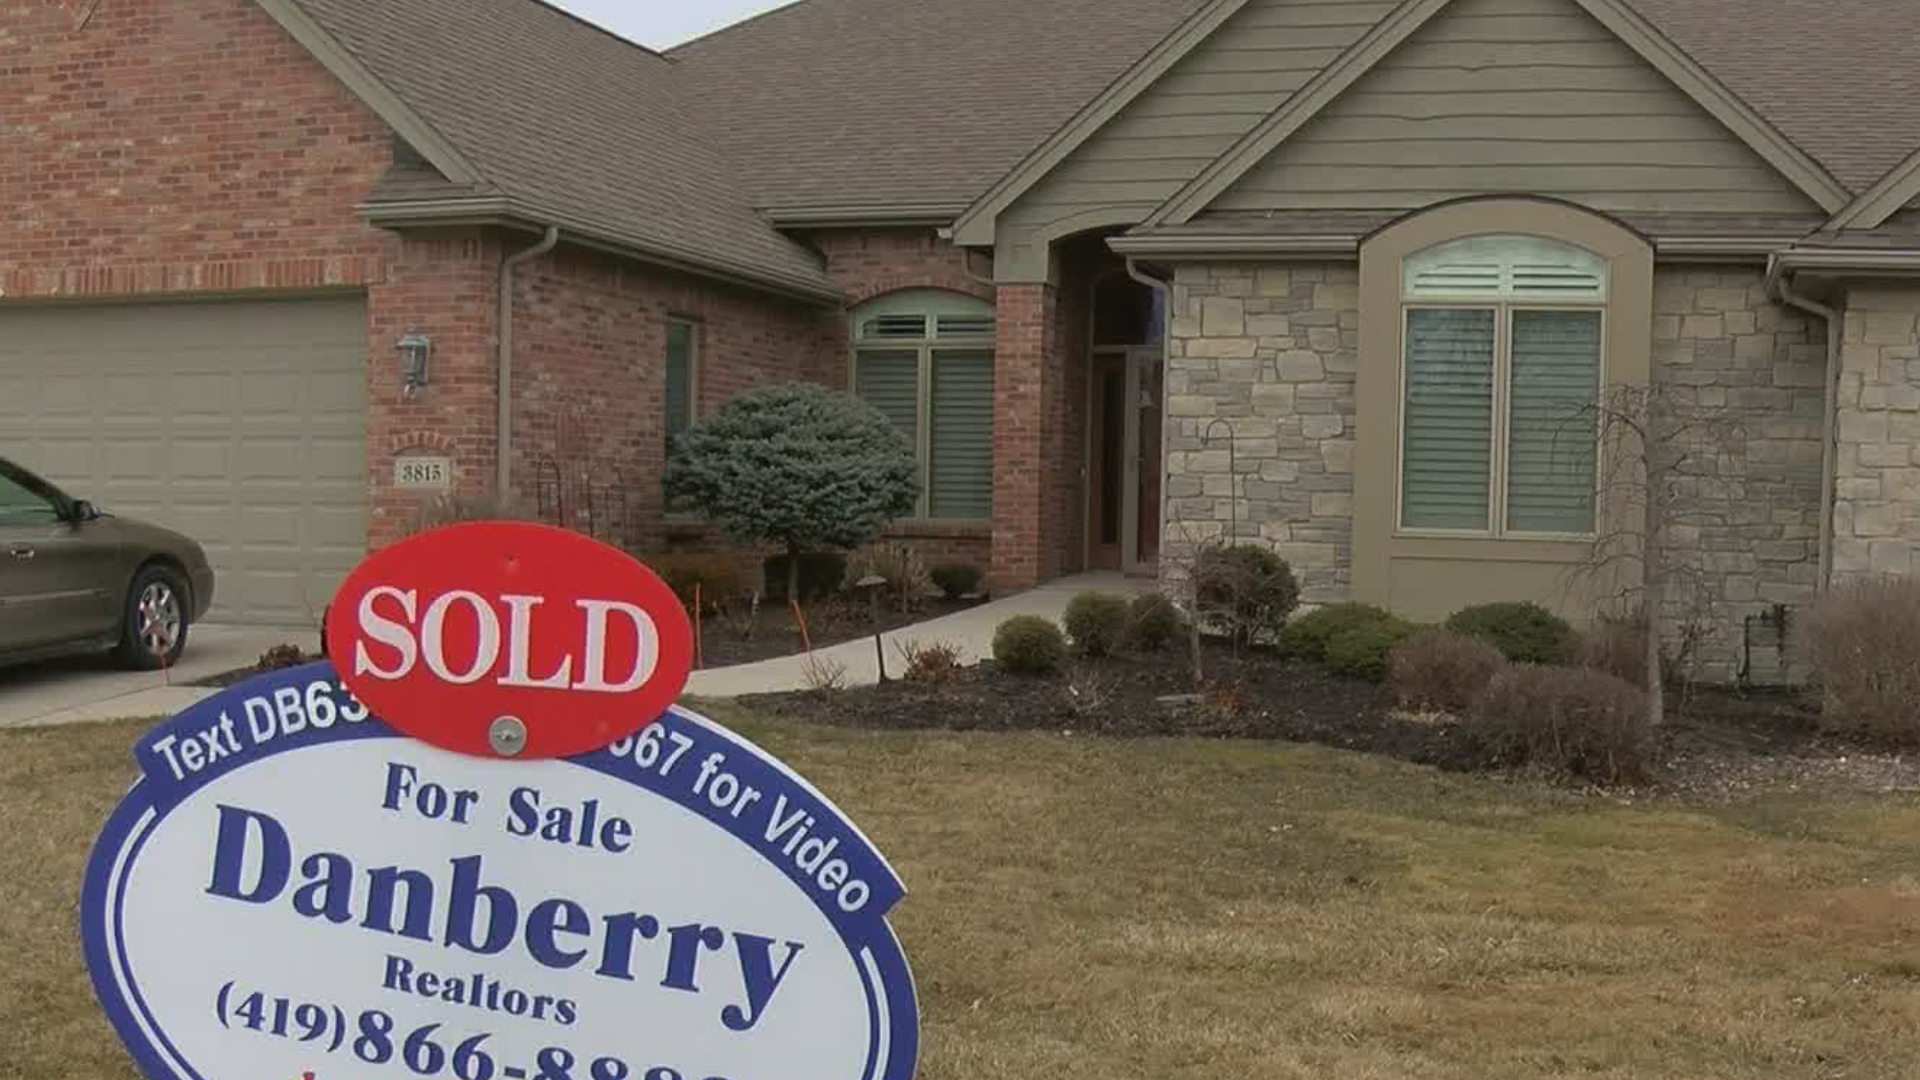 Mortgage rates are at a record low, helping to create an unprecedented seller's market.